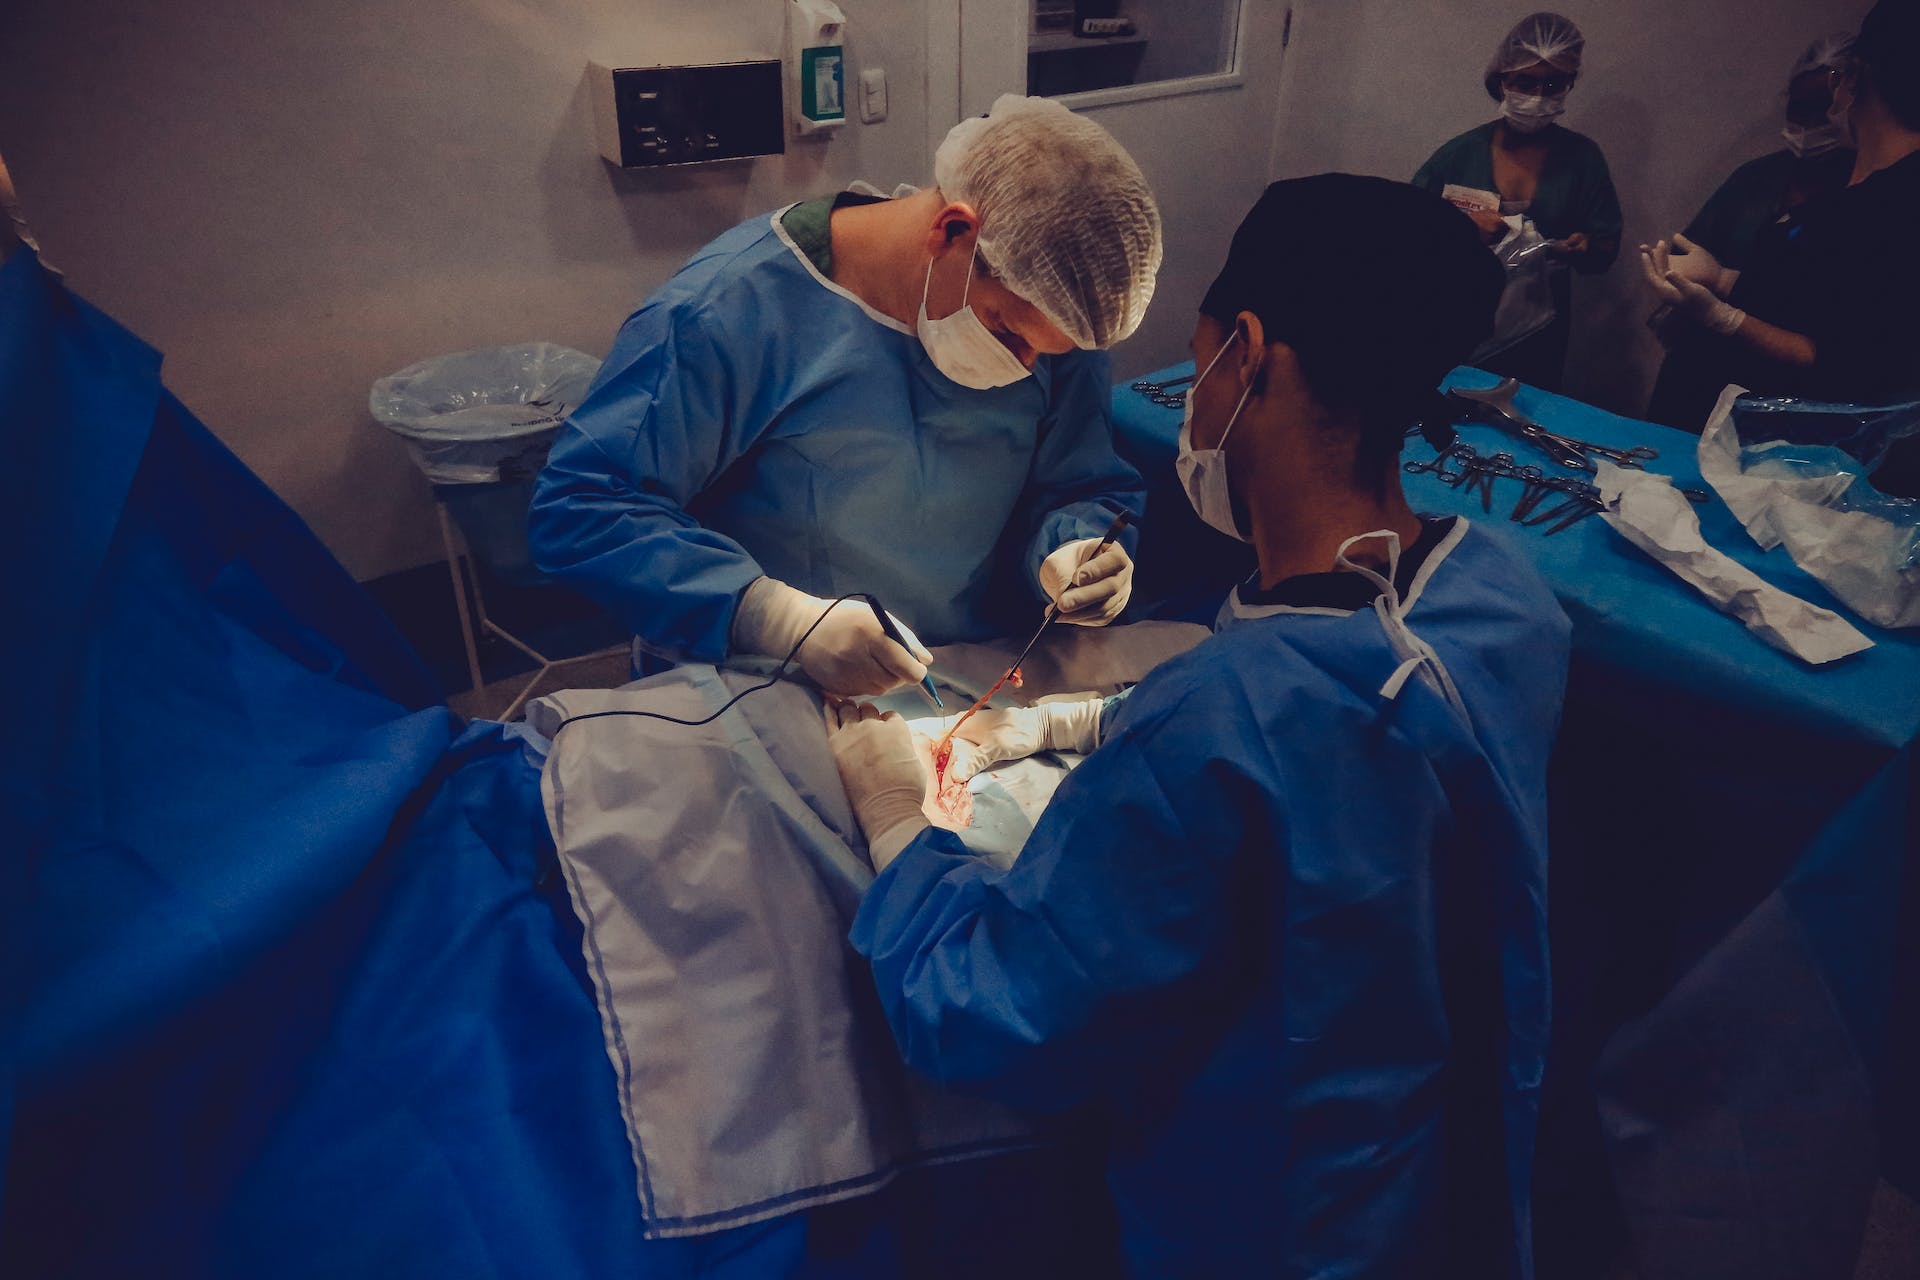 Person being operated on | Source: Pexels